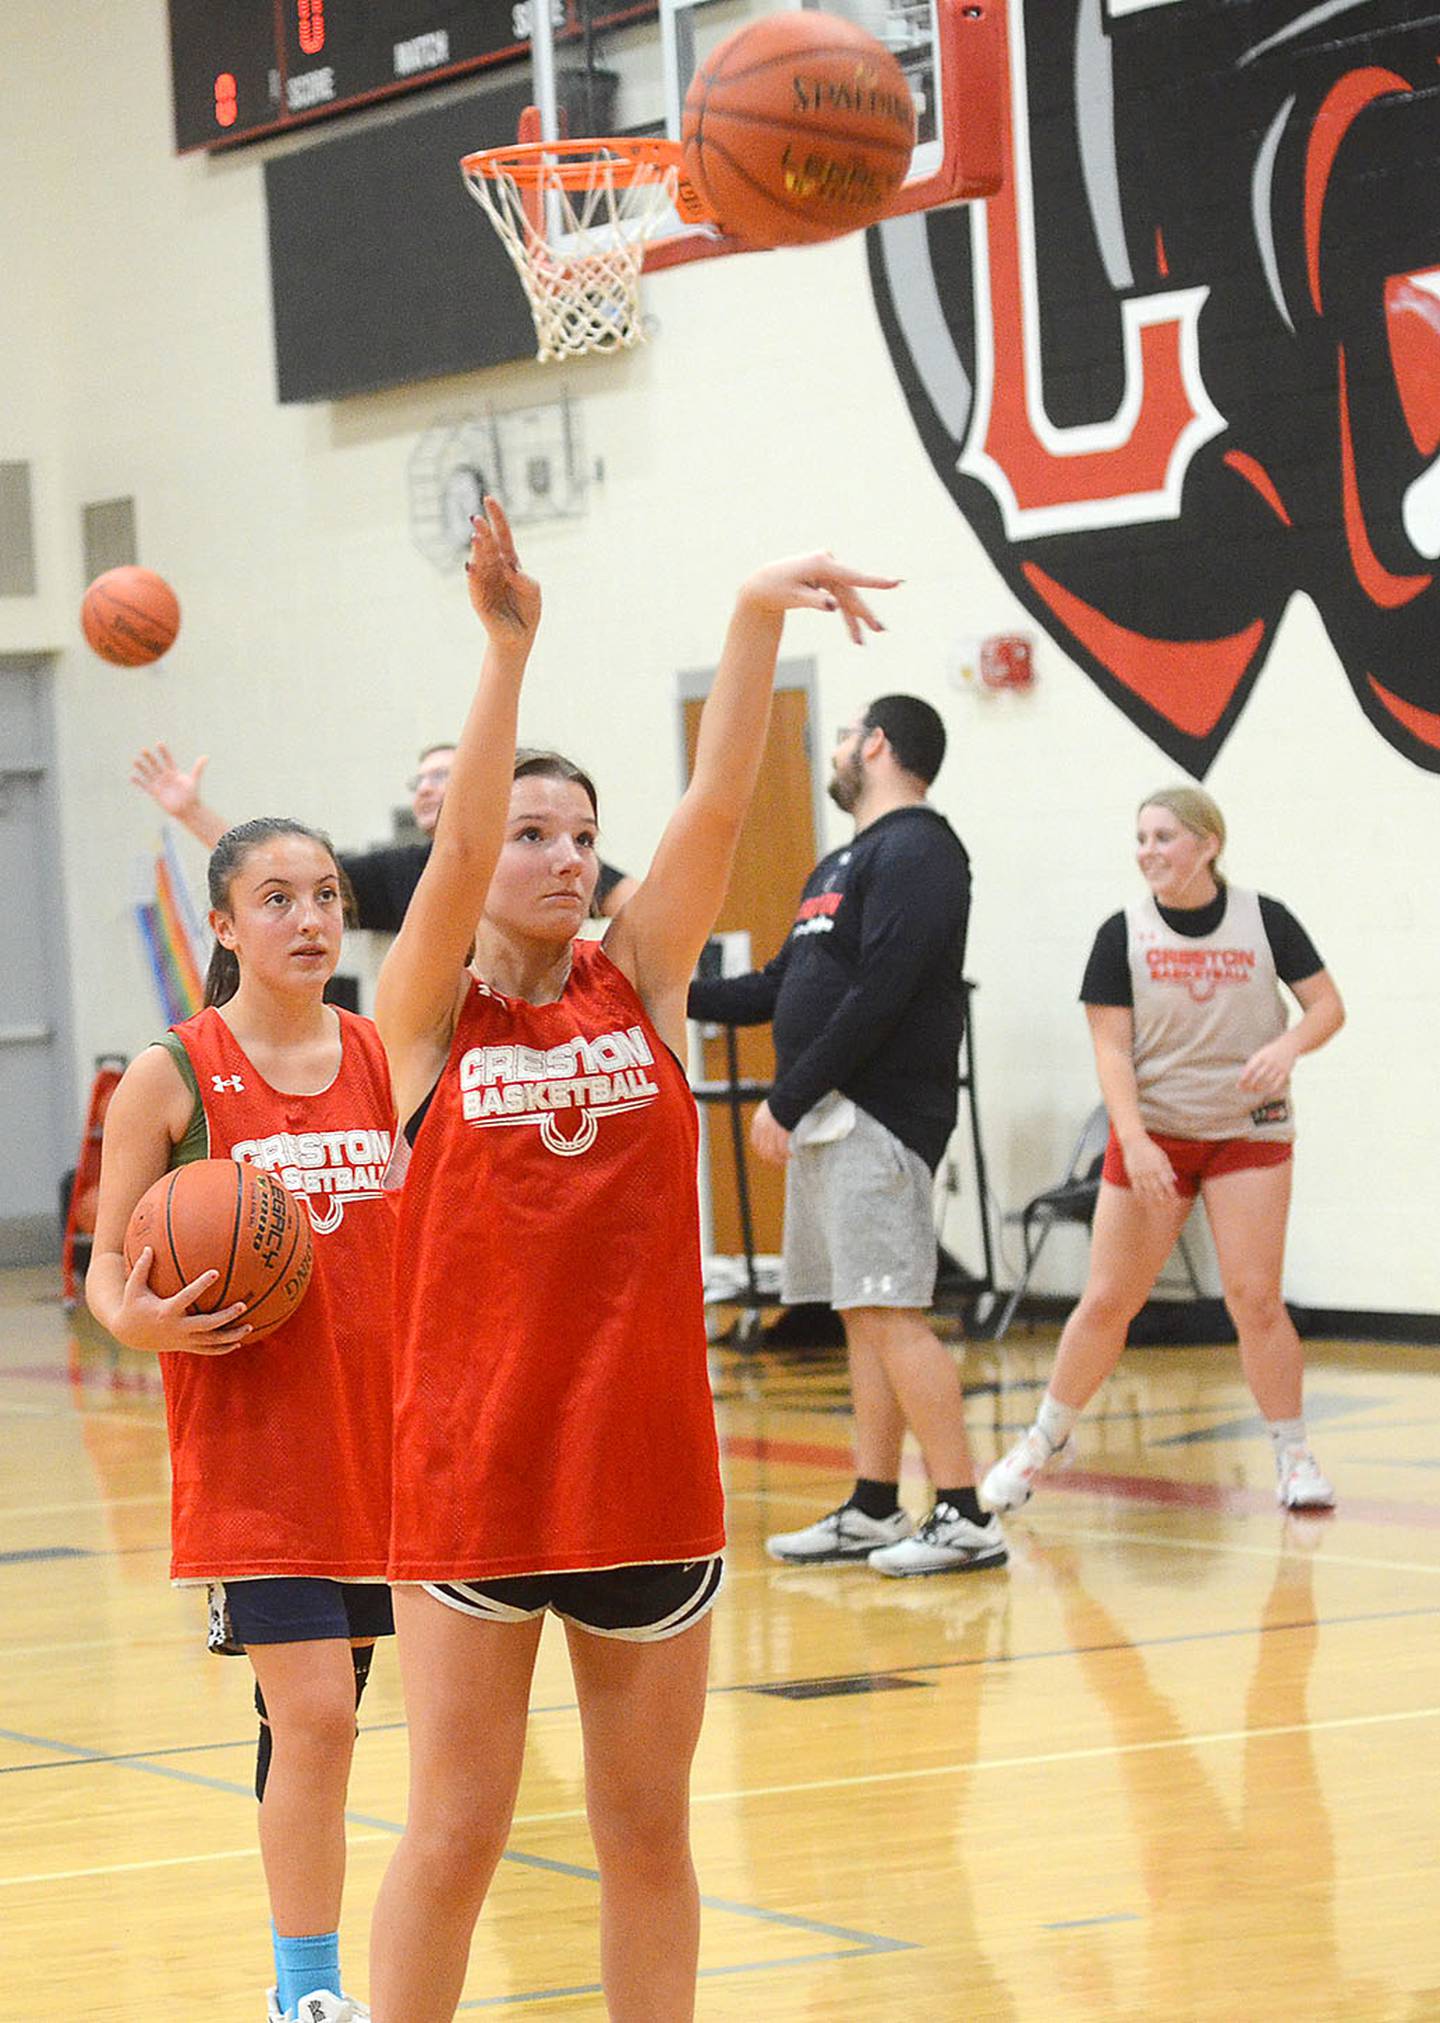 Creston senior Lydia Goins shoots during a free throw drill at a recent Creston practice. Goins is the lone senior on this year's team.